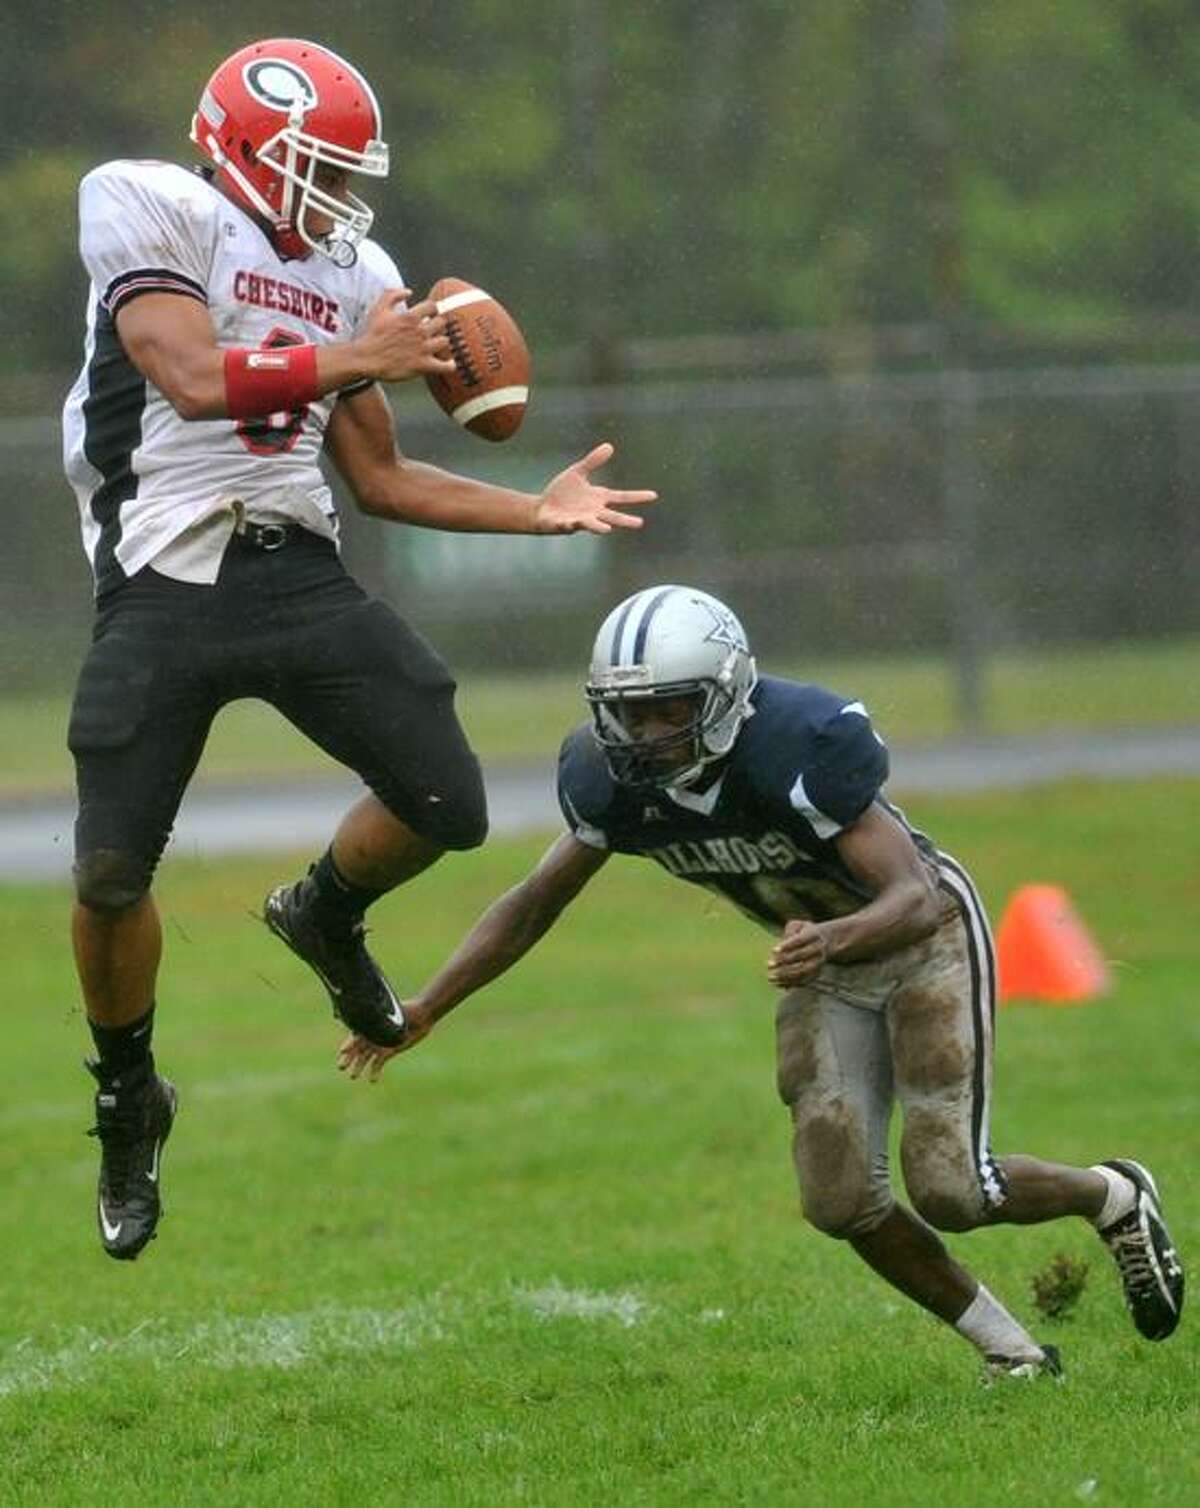 Cheshire's Sebastian Little, here defended by Hillhouse's Je'Vaughn Moore during a game in September, will lead a talented, and smart, group of Connecticut footballers as they take on Rhode Island in the 14th Governors' Cup game Saturday. (Peter Hvizdak/Register file photo)